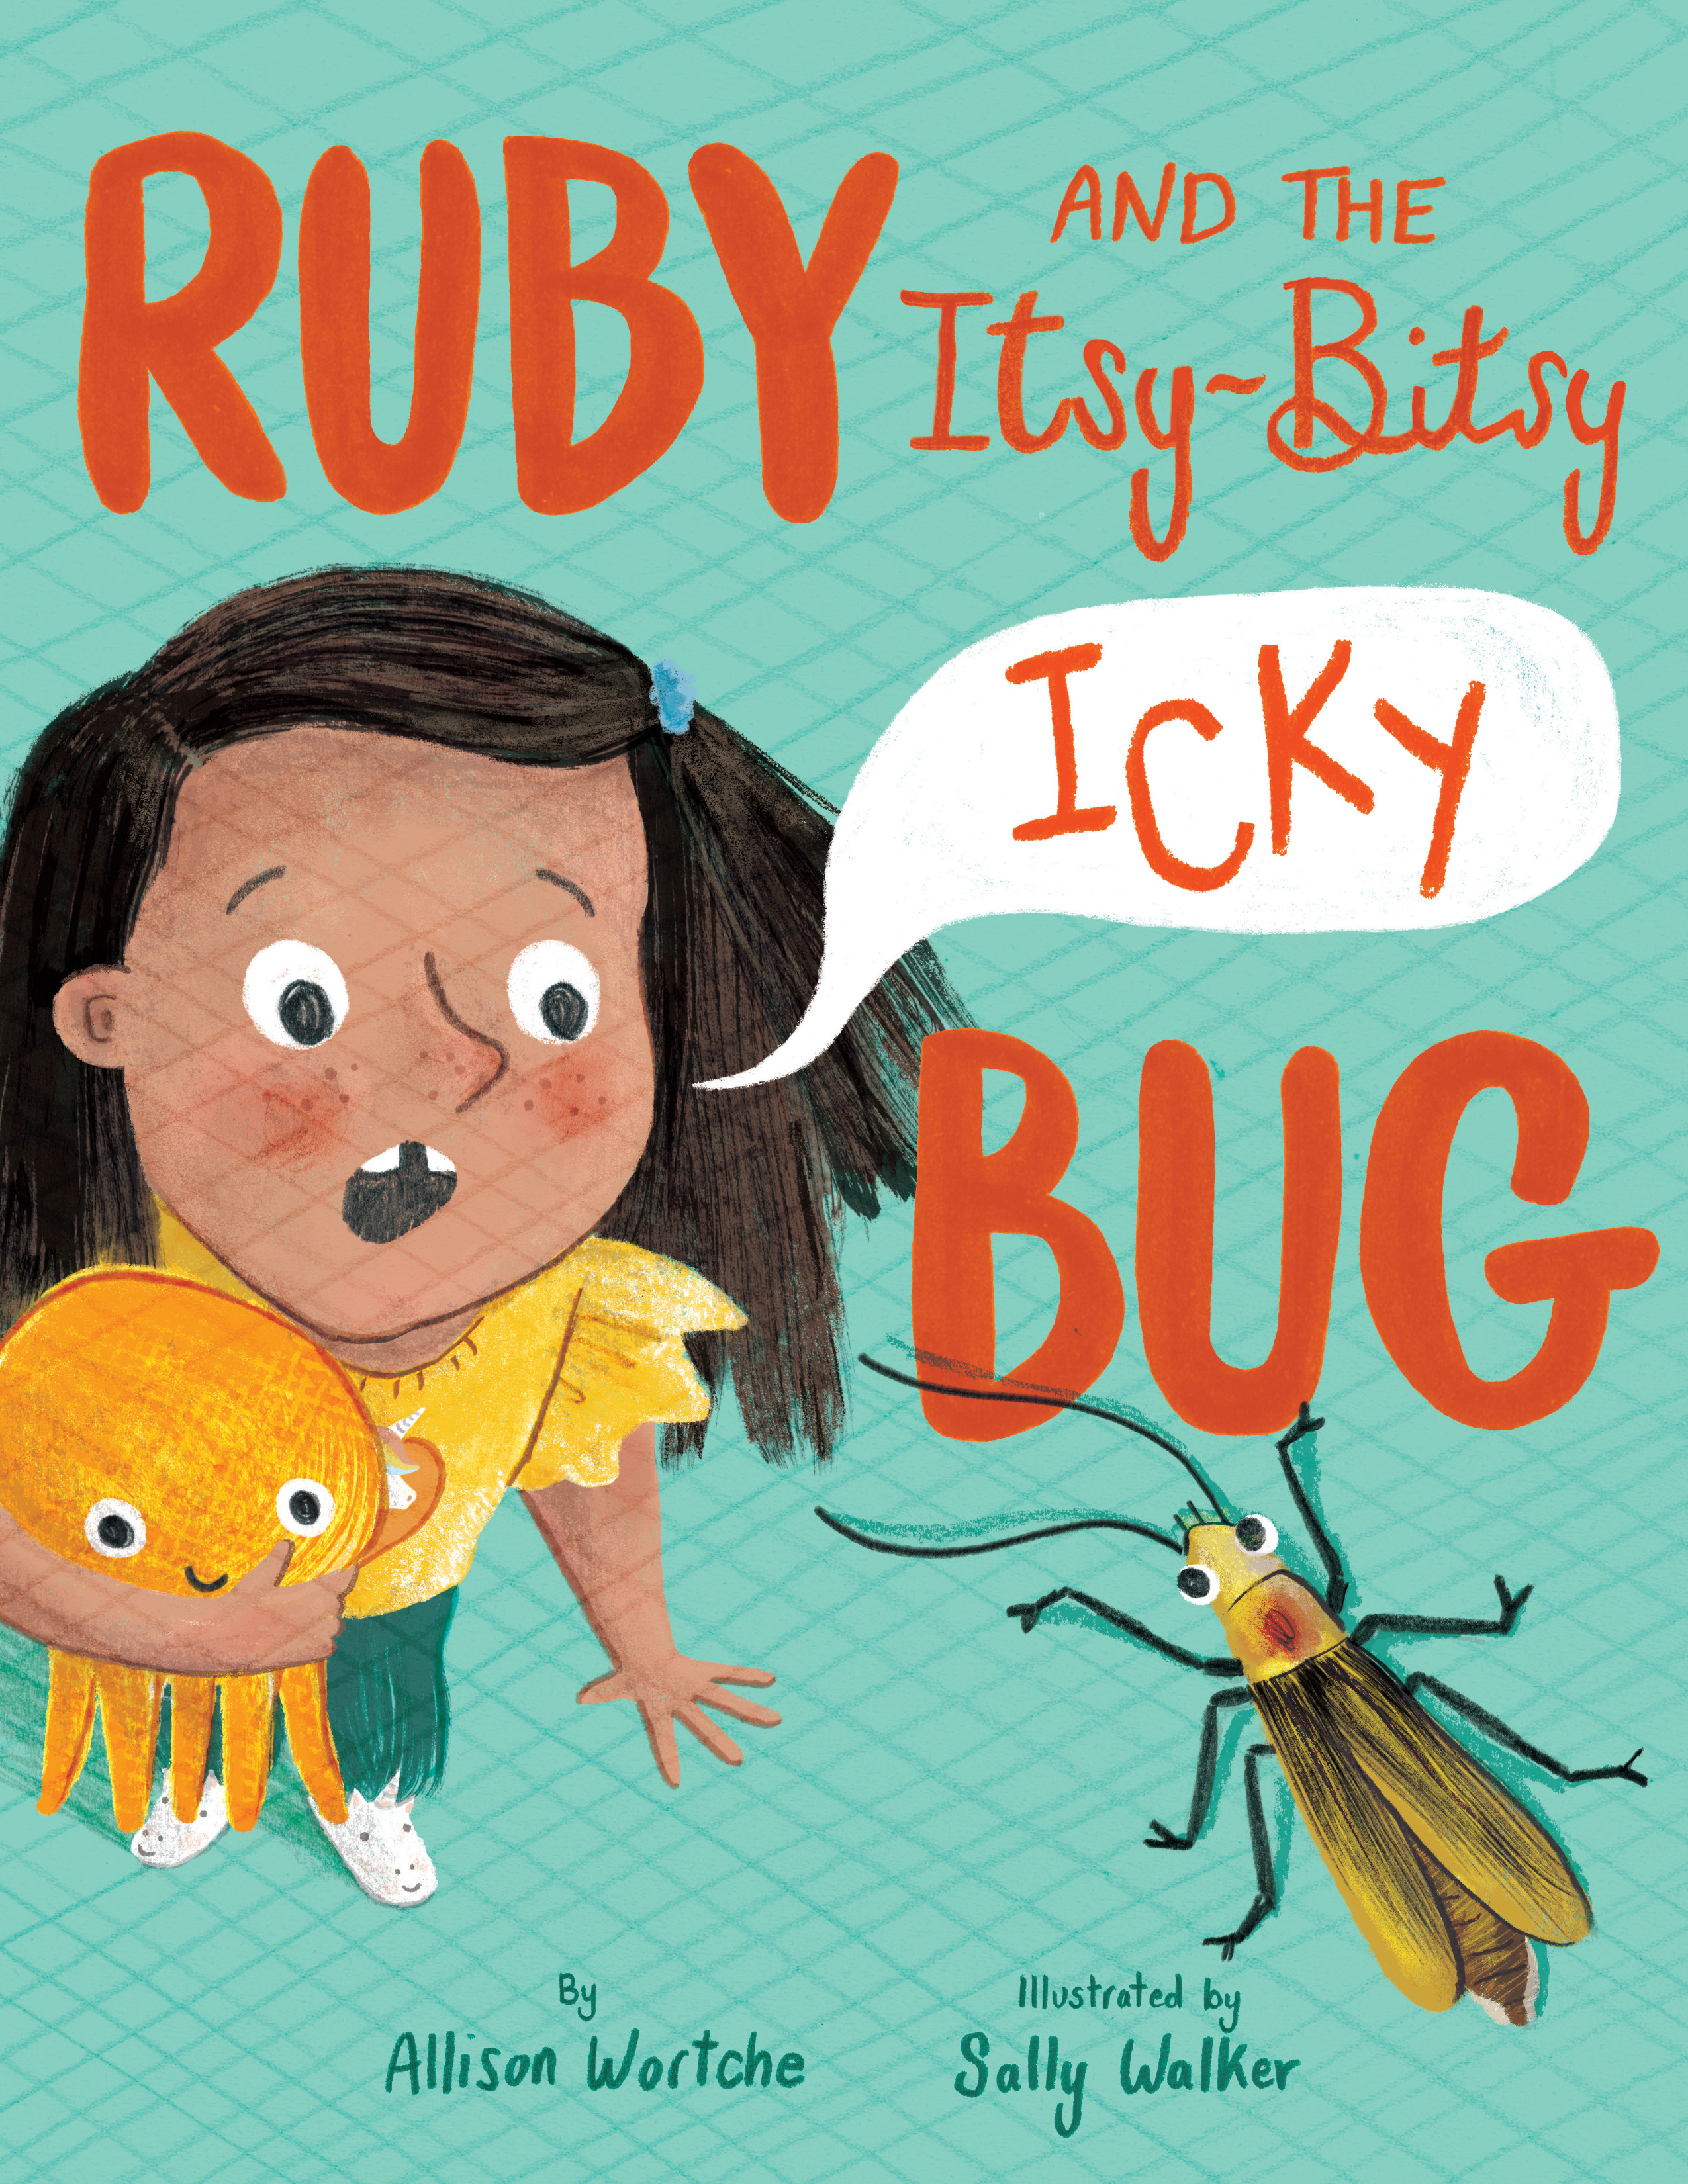 Ruby and the Itsy-Bitsy (Icky) Bug | Wortche, Allison